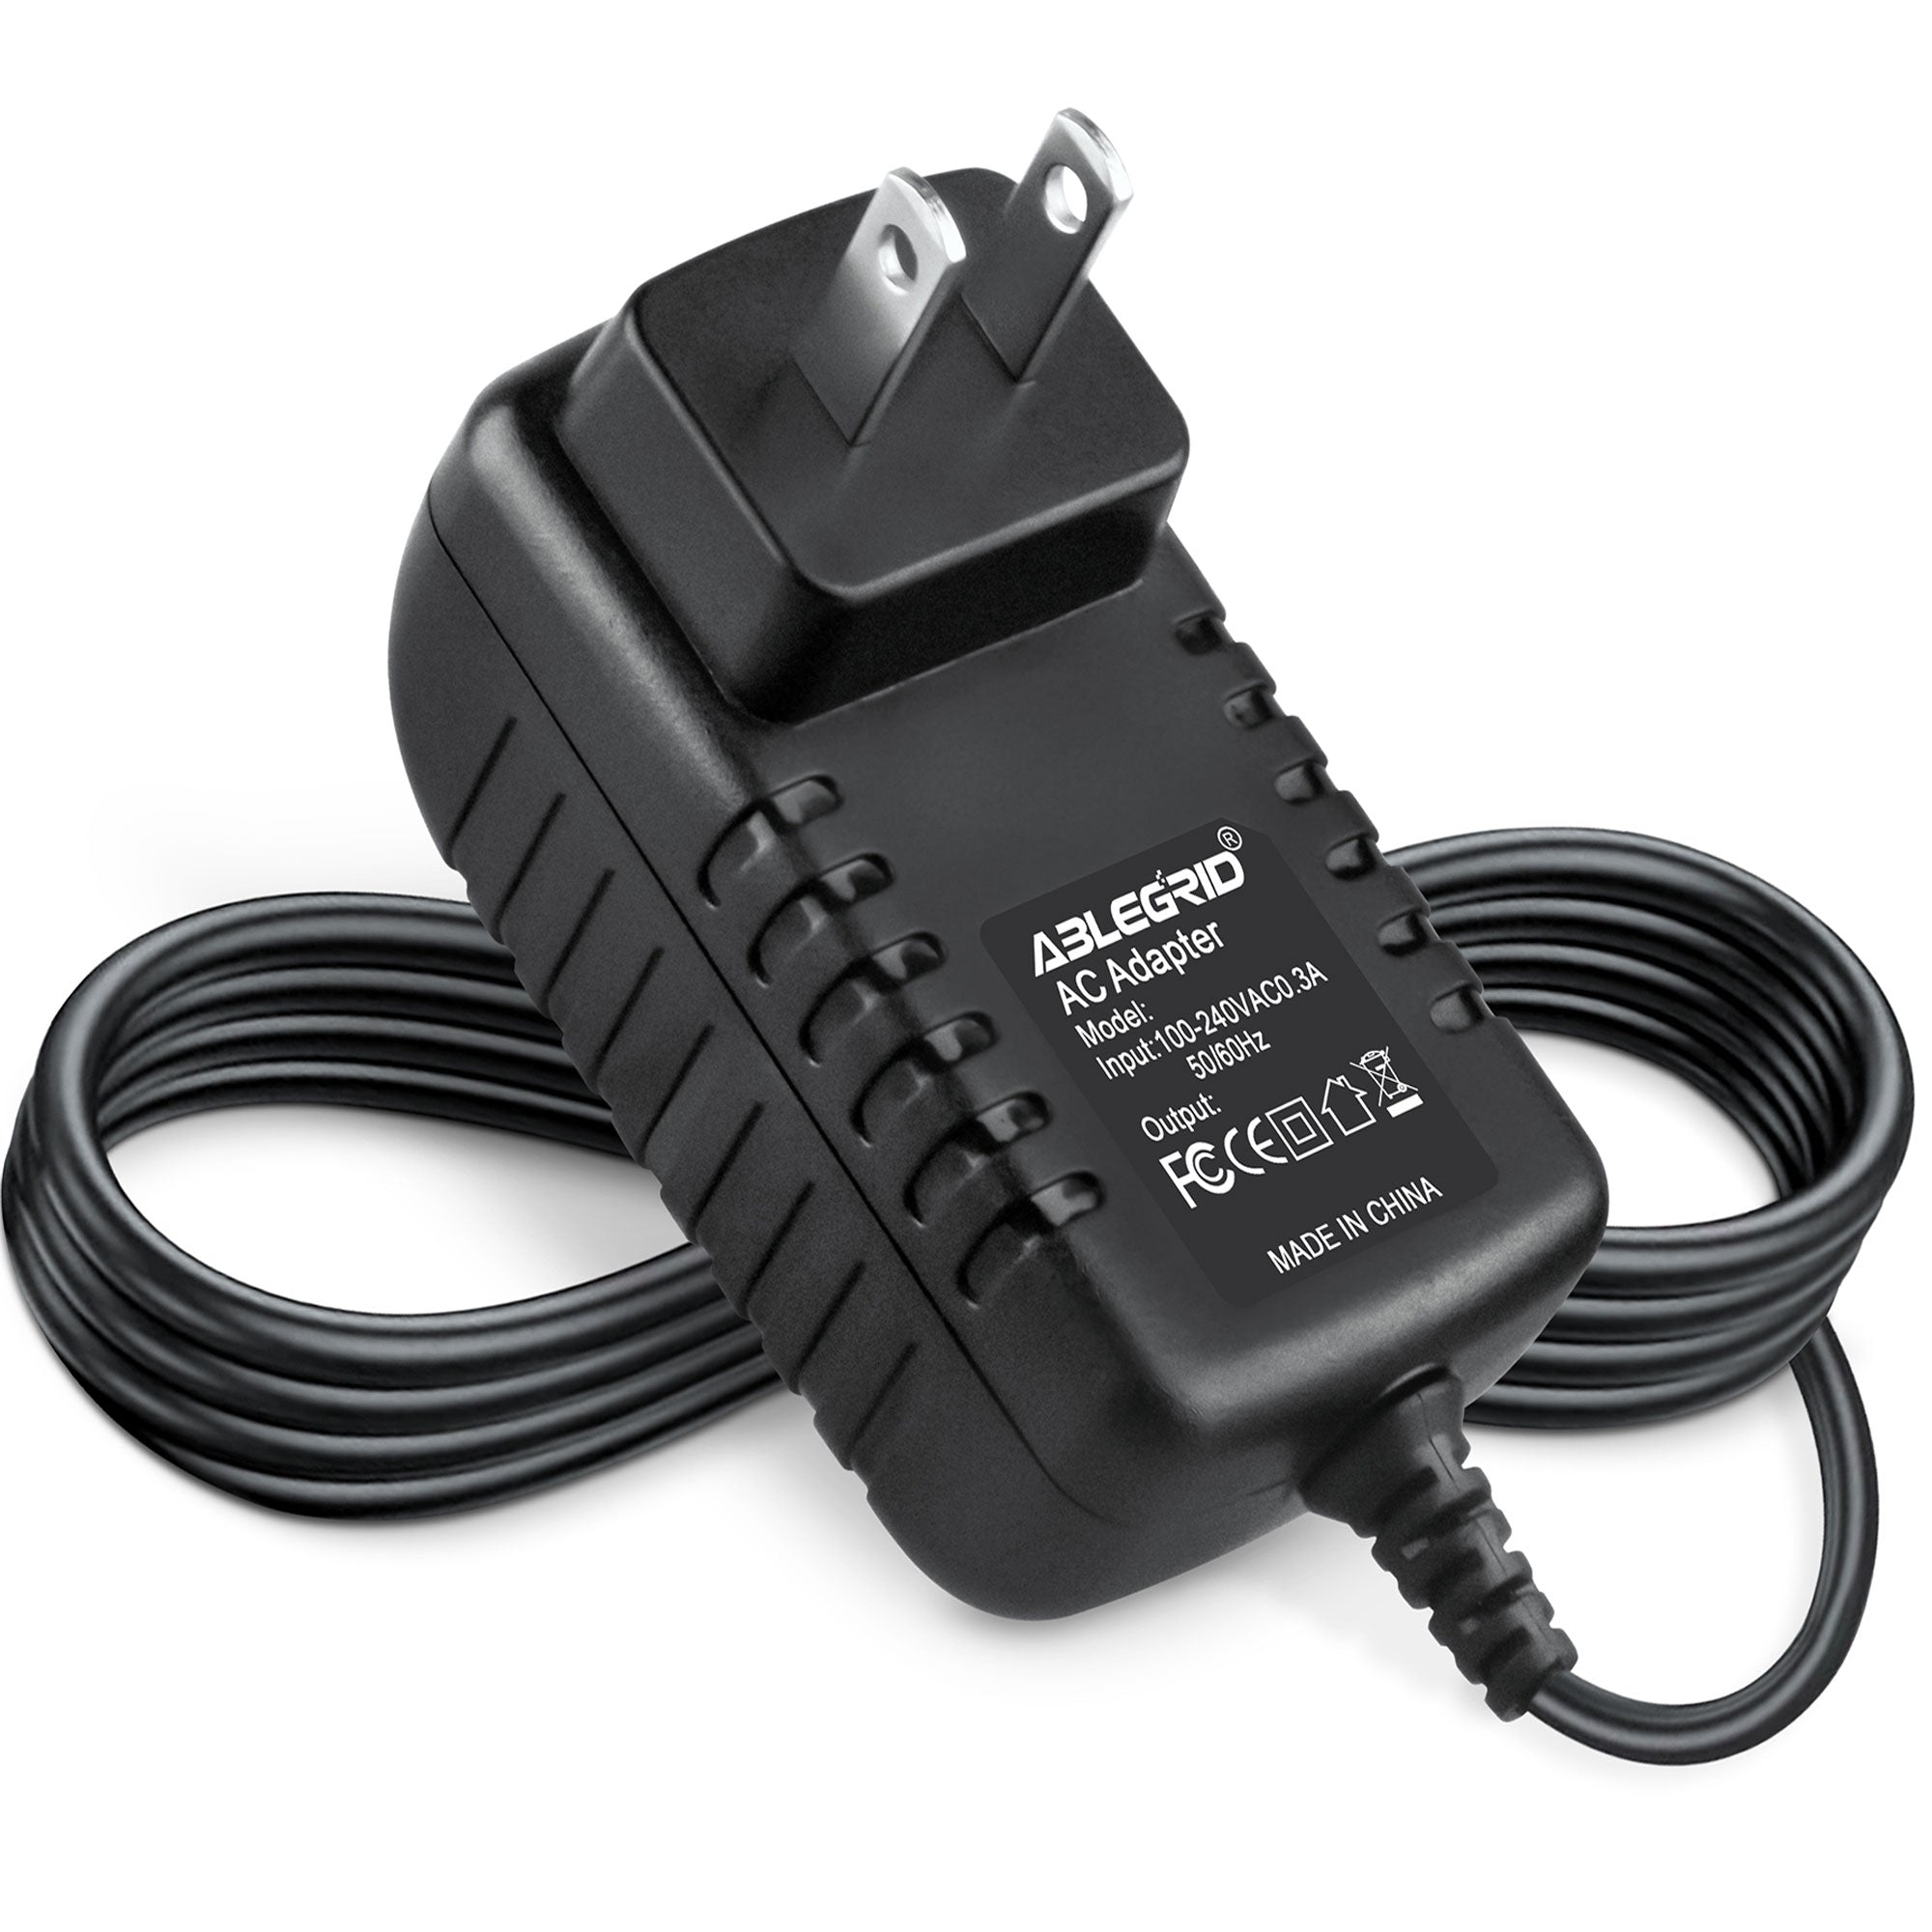 AbleGrid AC / DC Adapter for CS Cable Source Model: IVP045-120-1500 IVP0451201500 Power Supply Cord Cable PS Wall Home Charger Input: 100 - 240 VAC 50/60Hz Worldwide Voltage Use Mains PSU